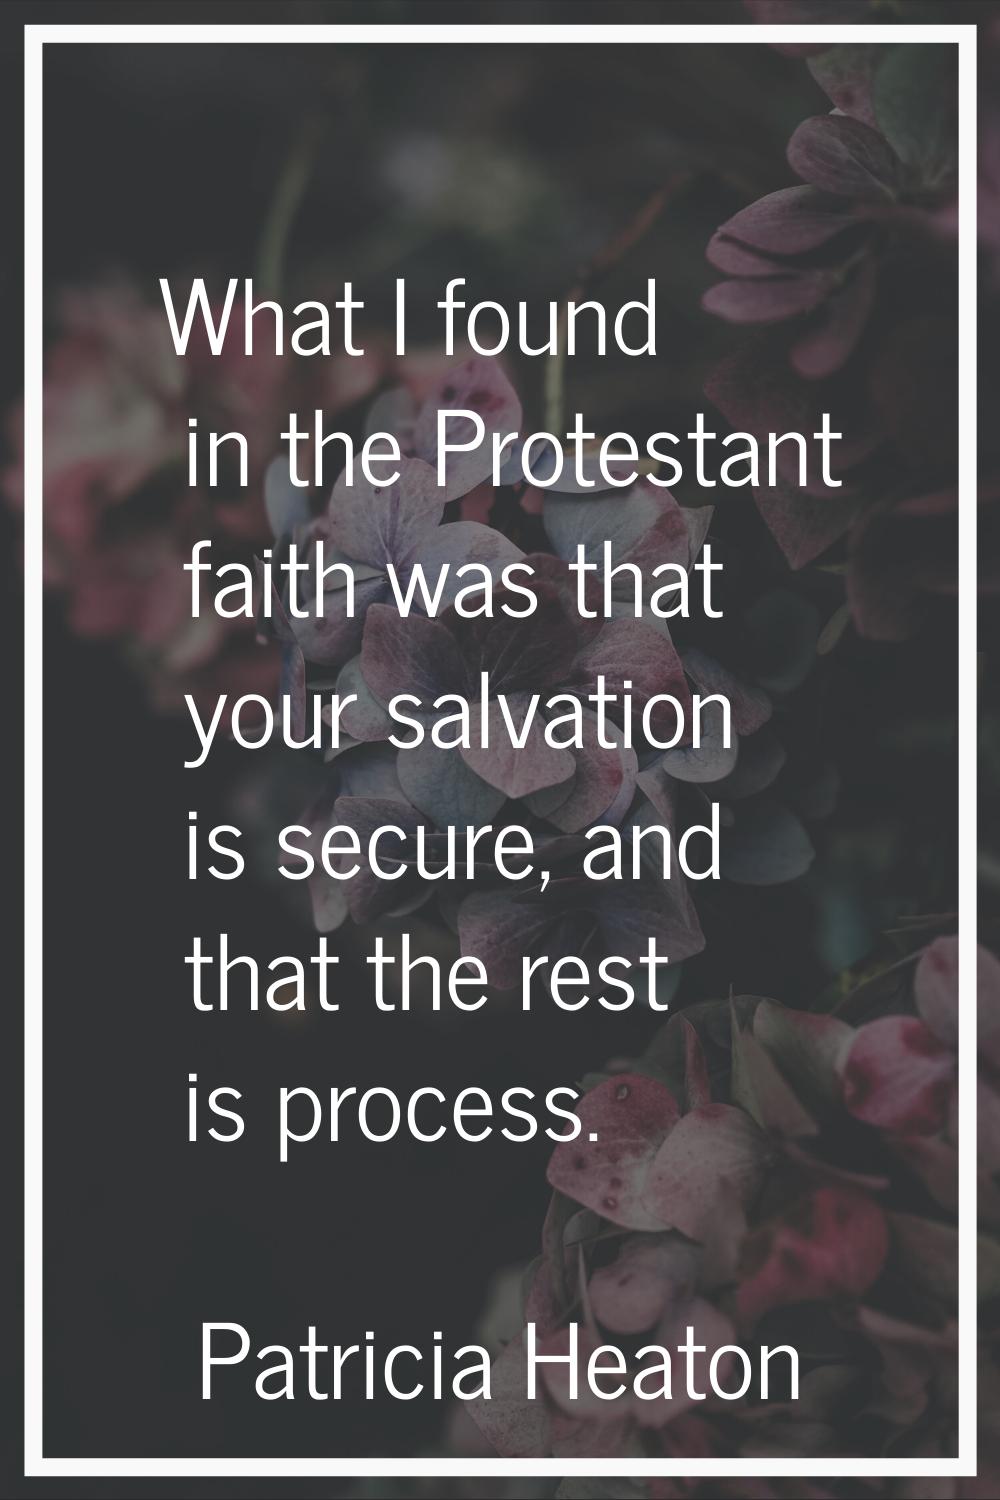 What I found in the Protestant faith was that your salvation is secure, and that the rest is proces